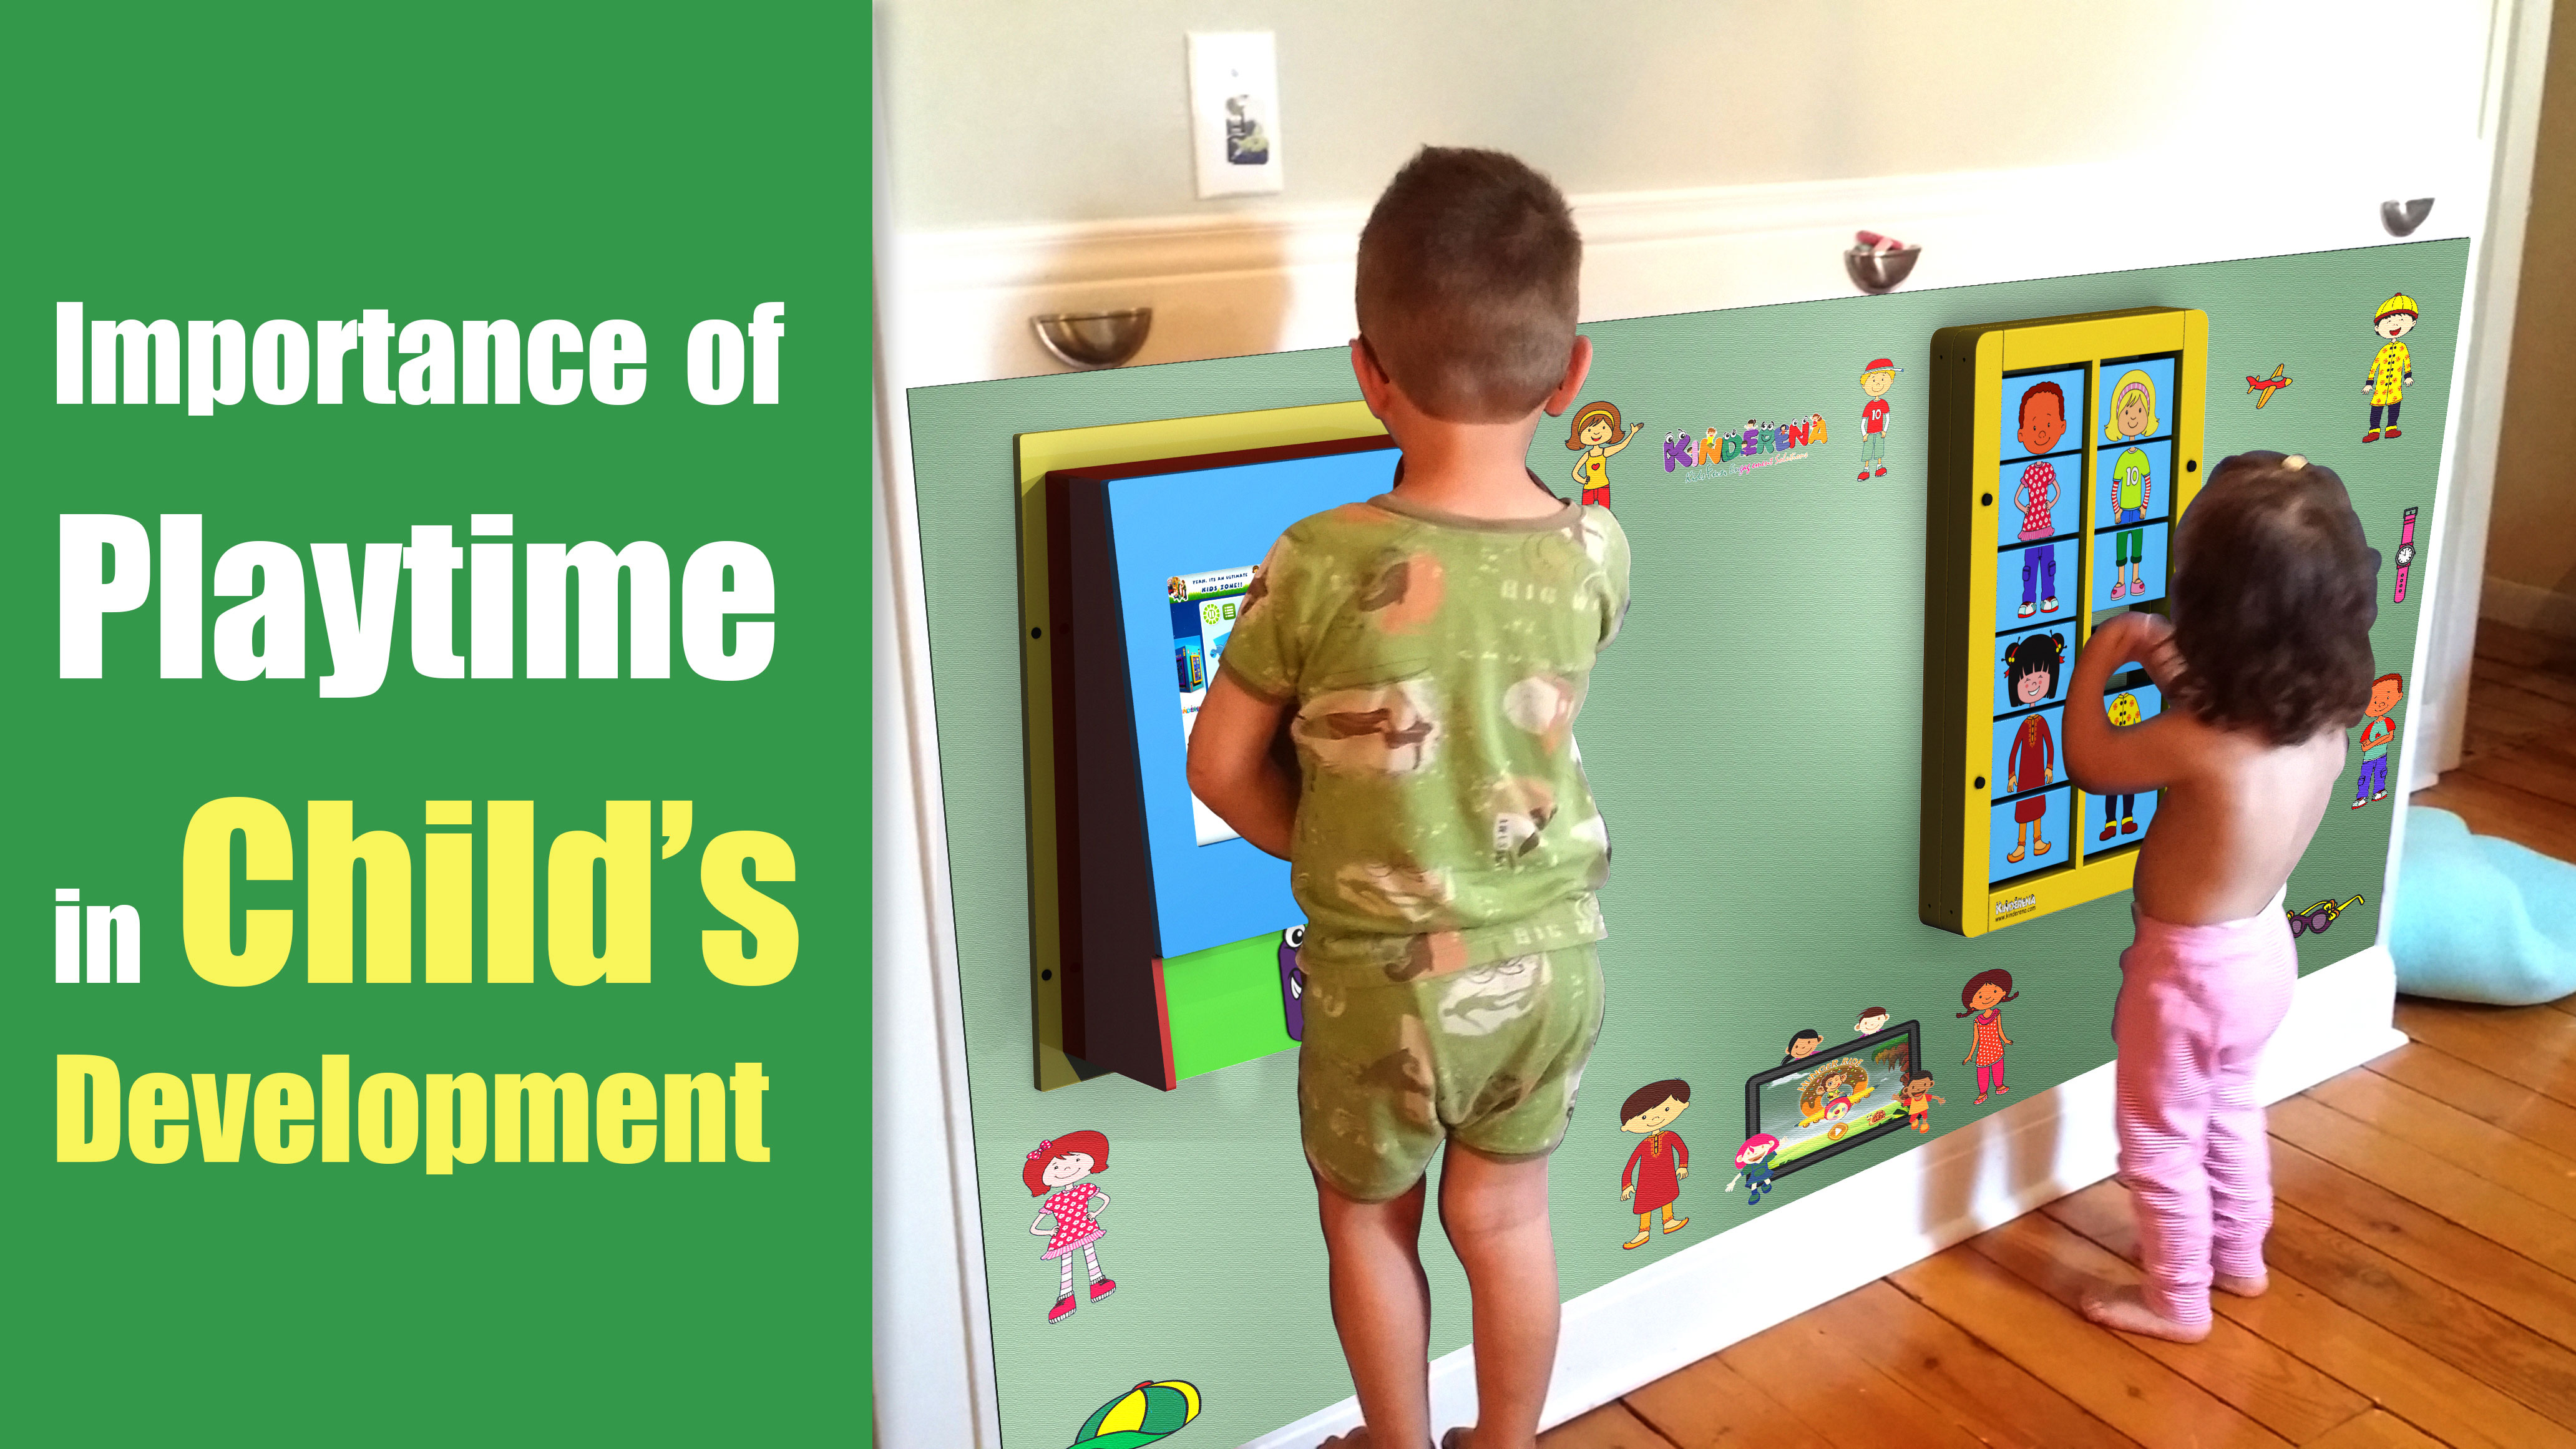 Importance of Playtime in Child's Development